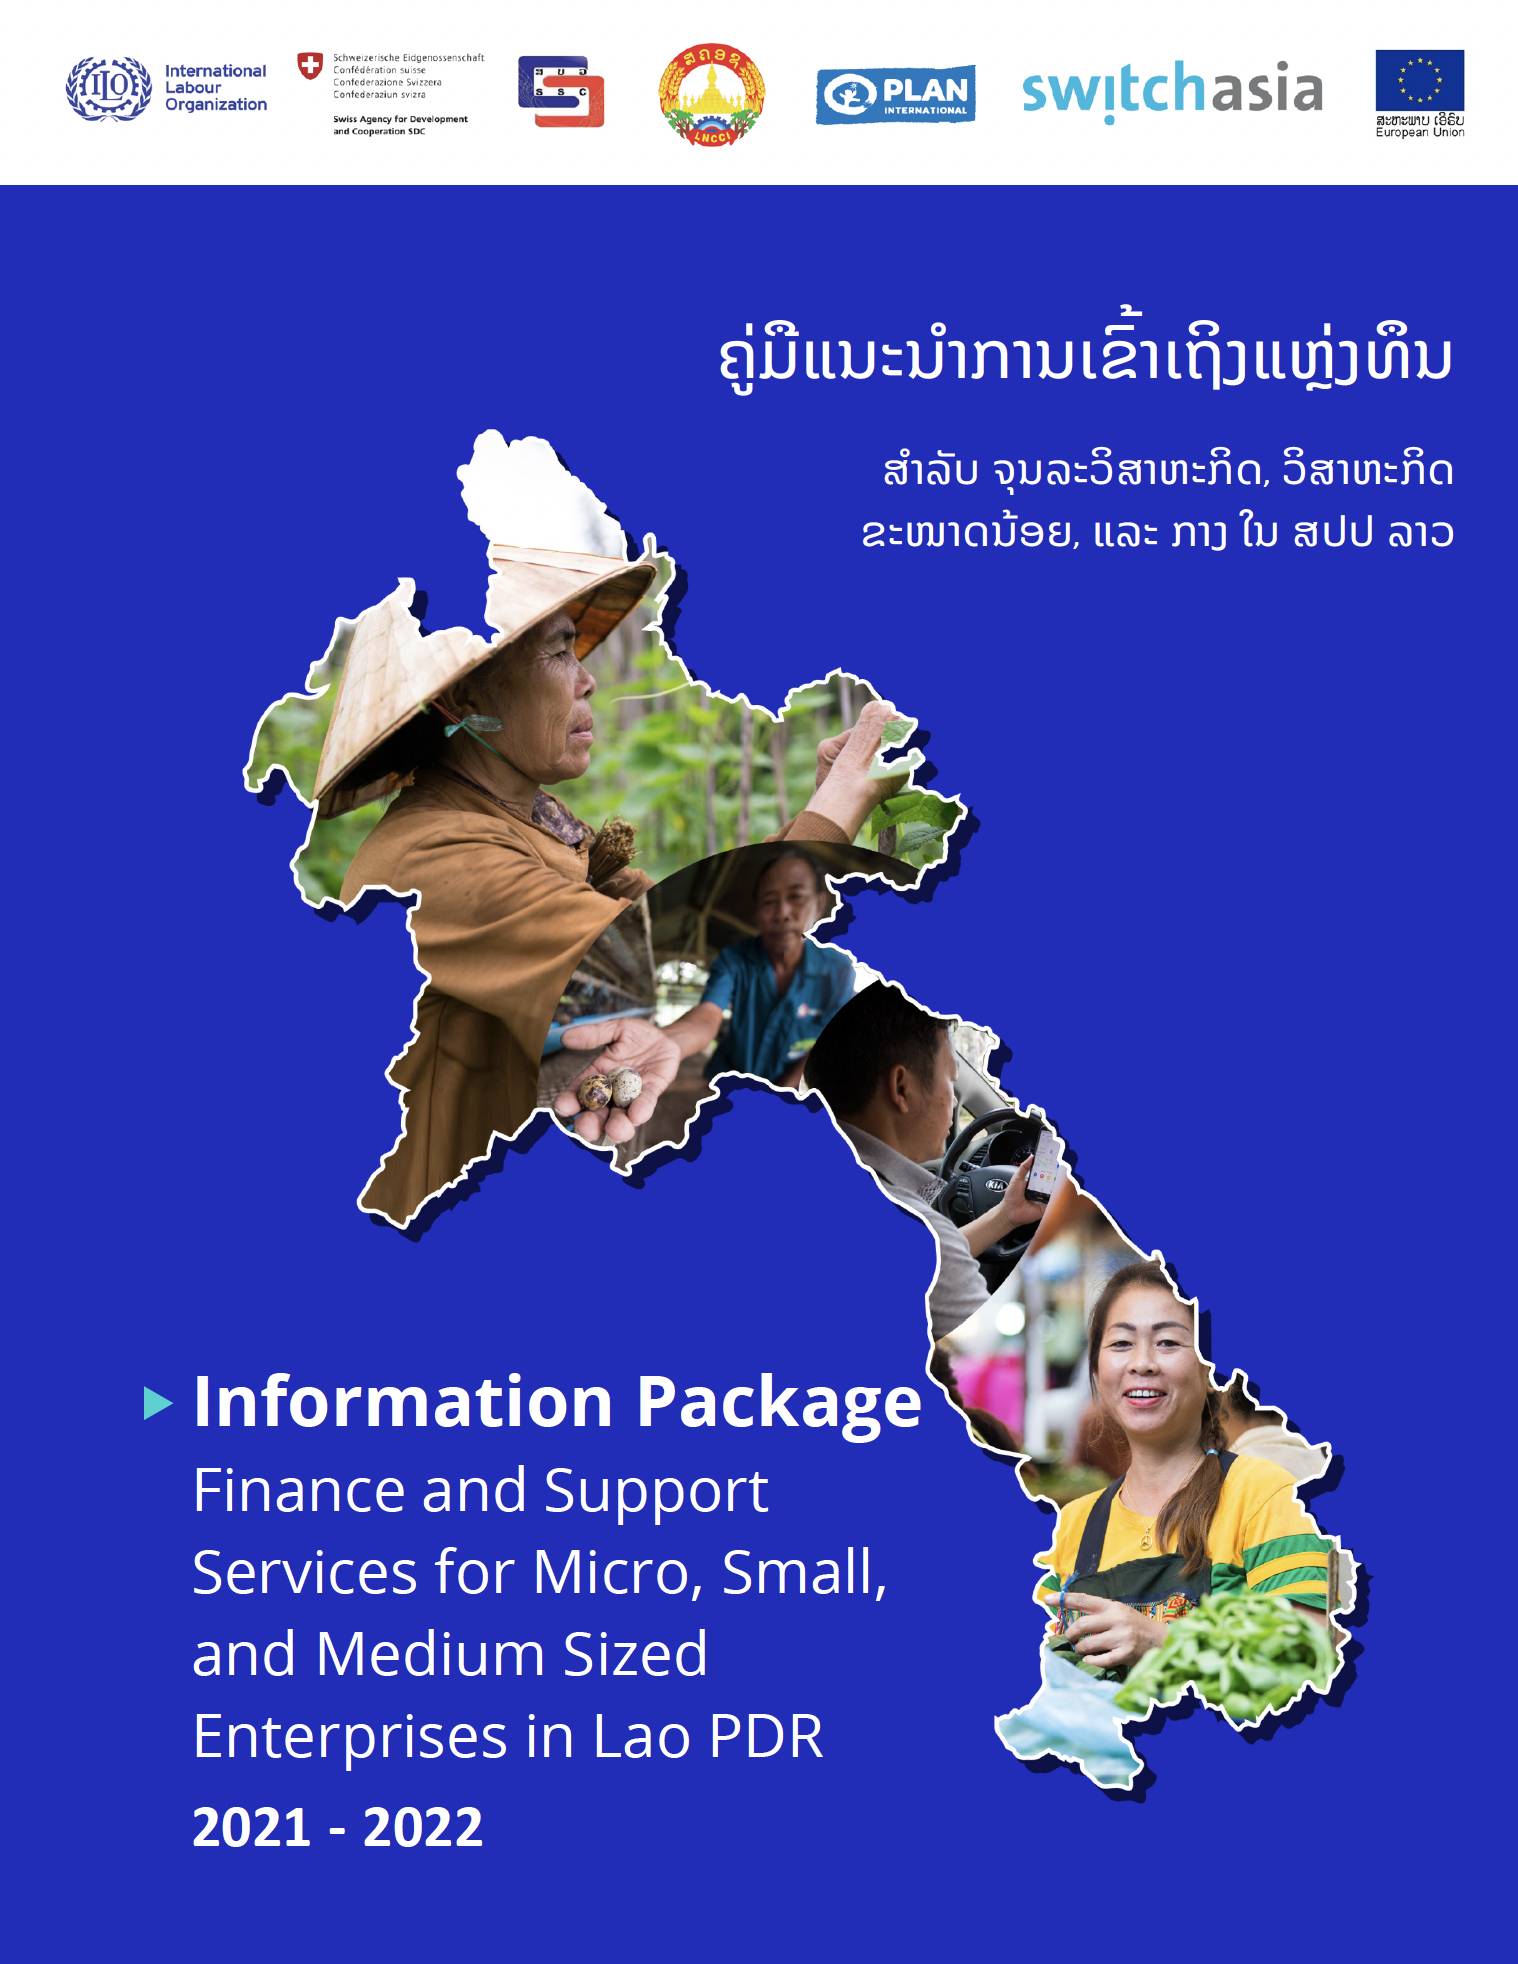 Finance and Support Services for Micro, Small, and Medium Sized Enterprises in Lao PDR